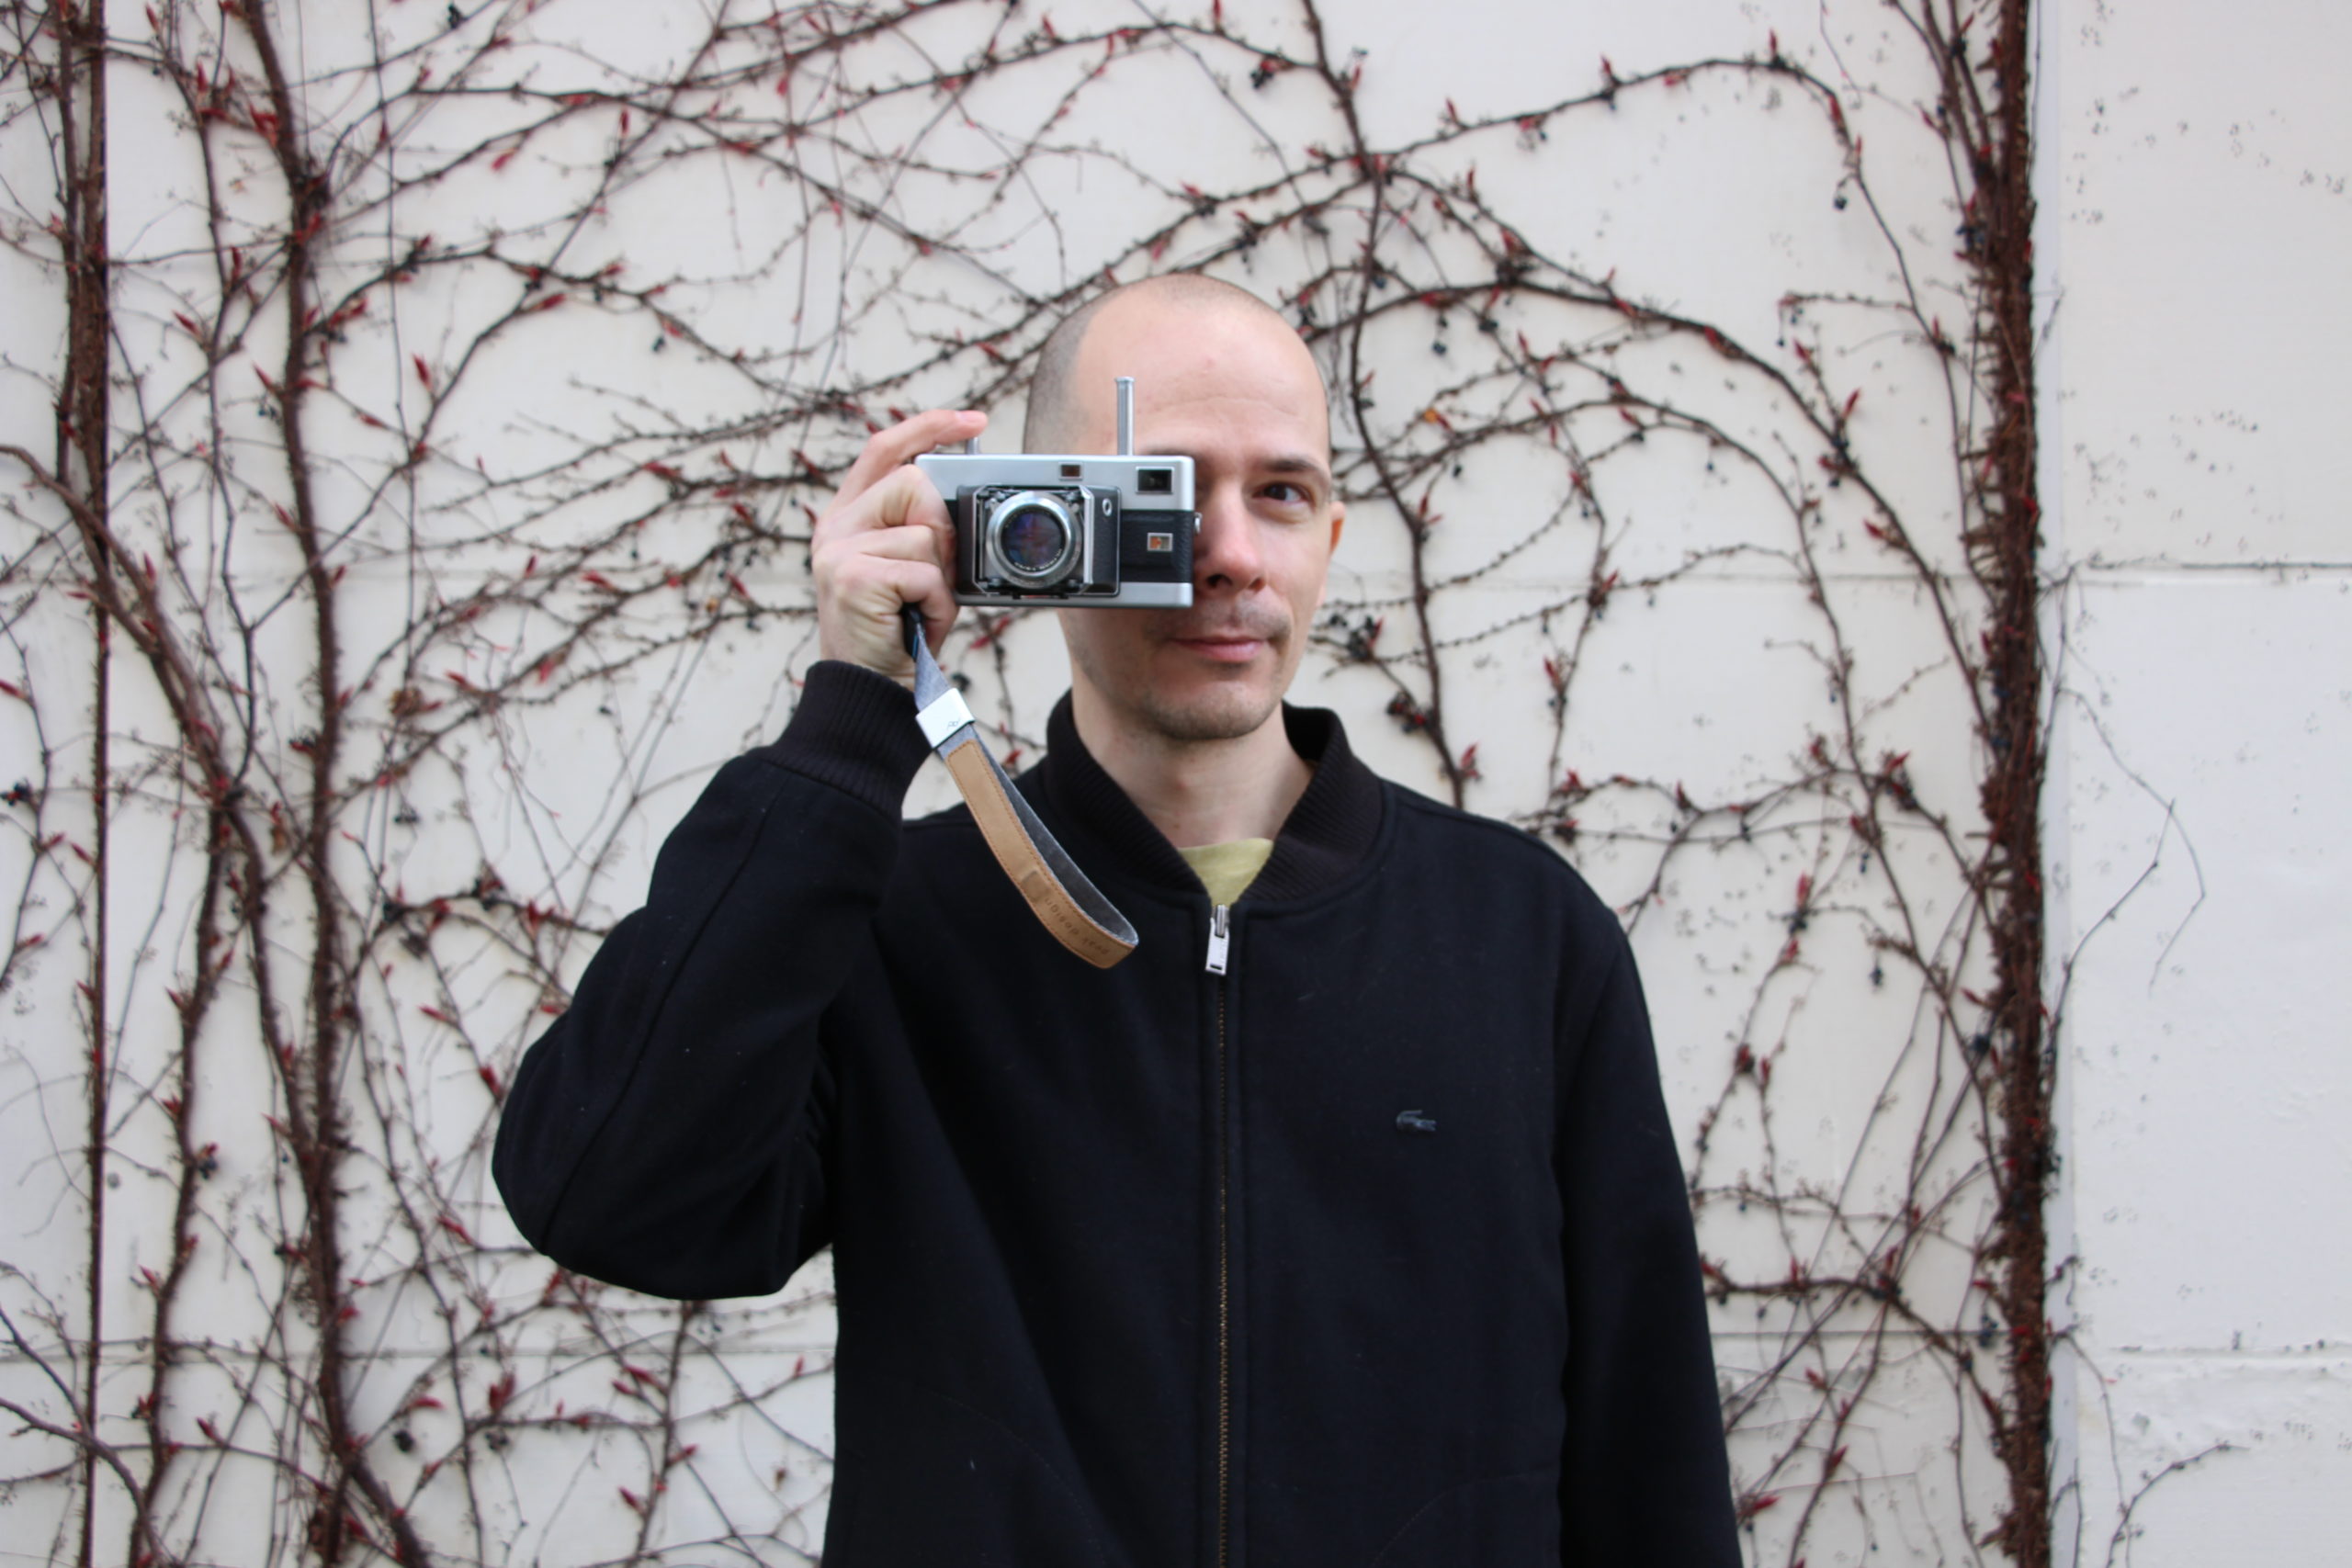 A man stands with an analogue film camera up to his face, his finger rests on the shutter button.